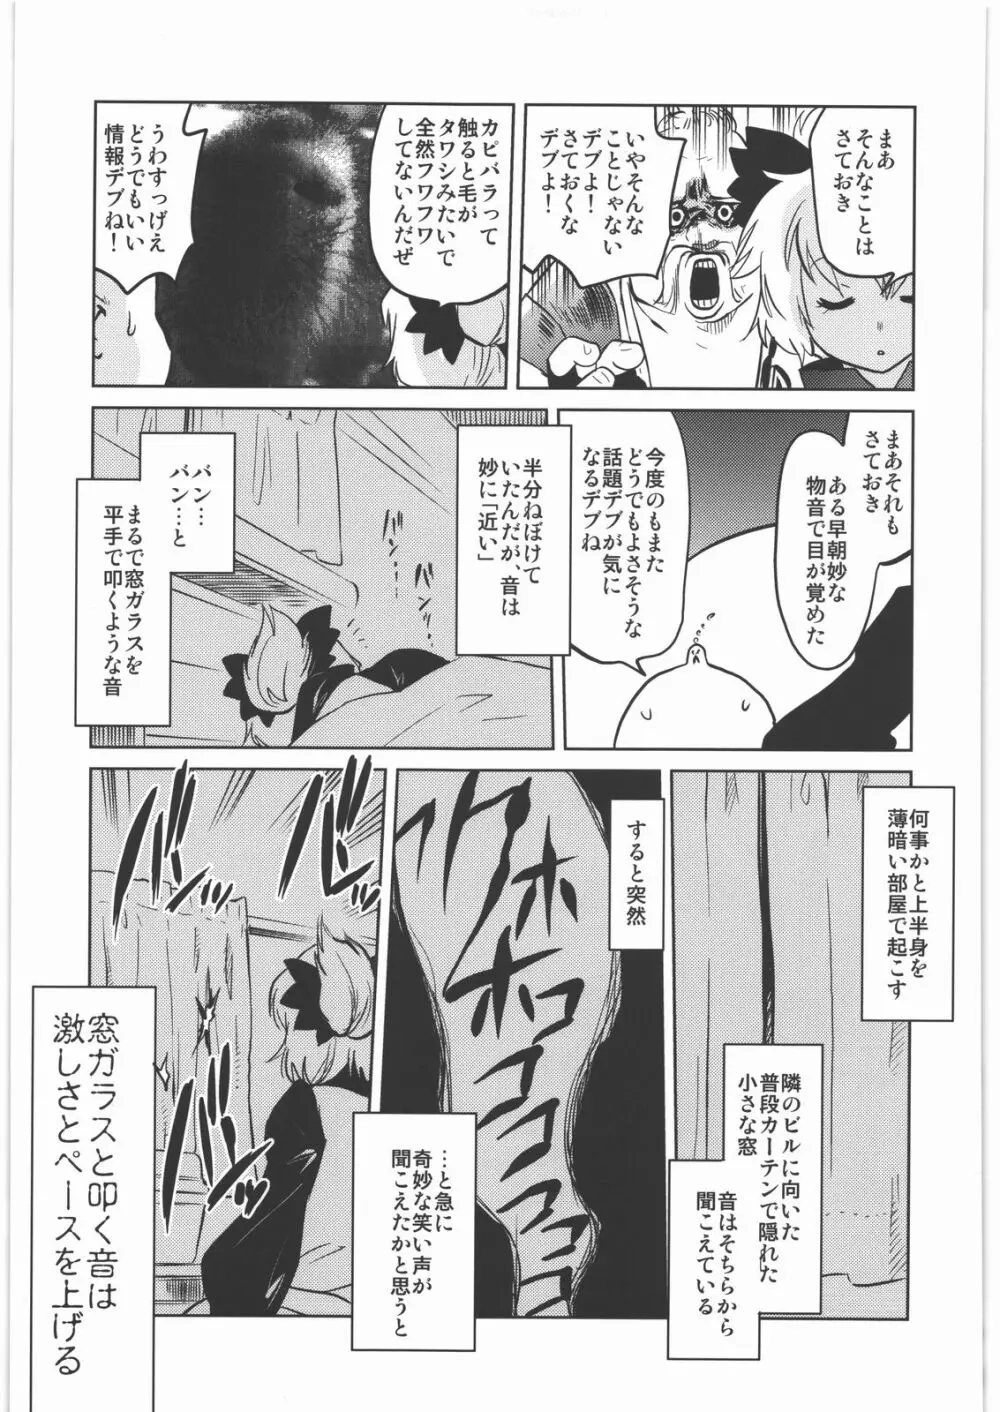 甲冑通信 弐之號 Page.44